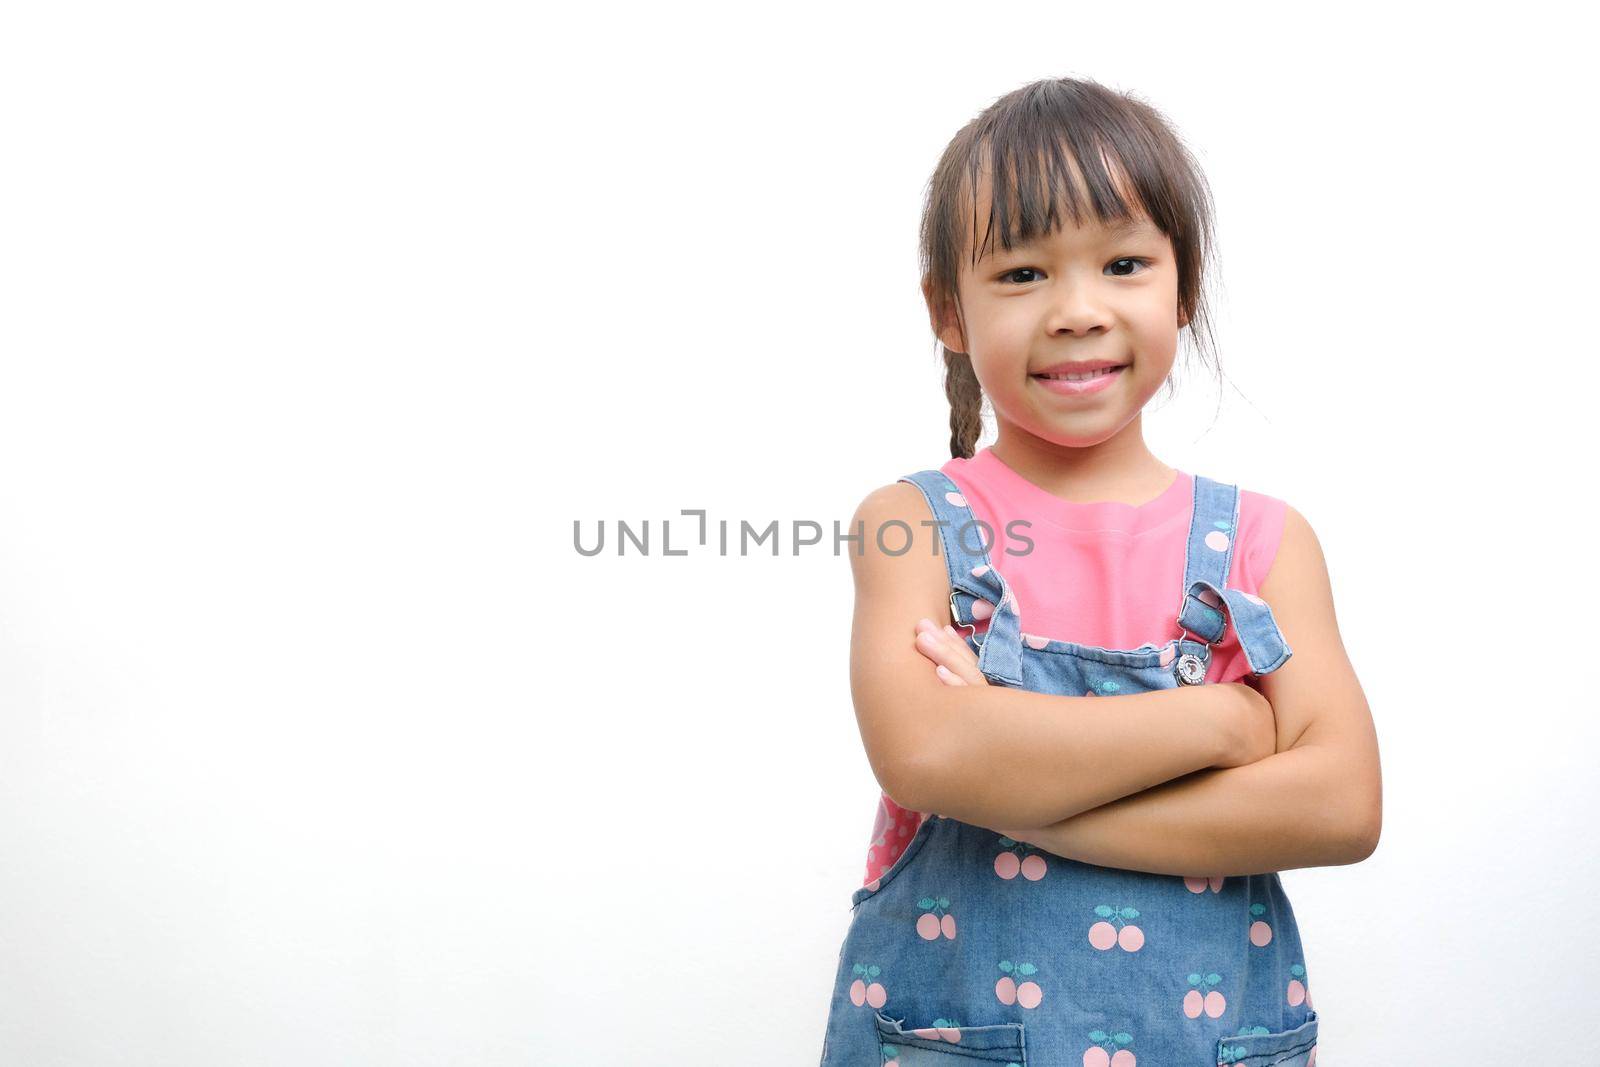 Asian cute little girl in jean overalls smiling showing her white teeth looking at the camera standing with her arms crossed on a white background with copy space.